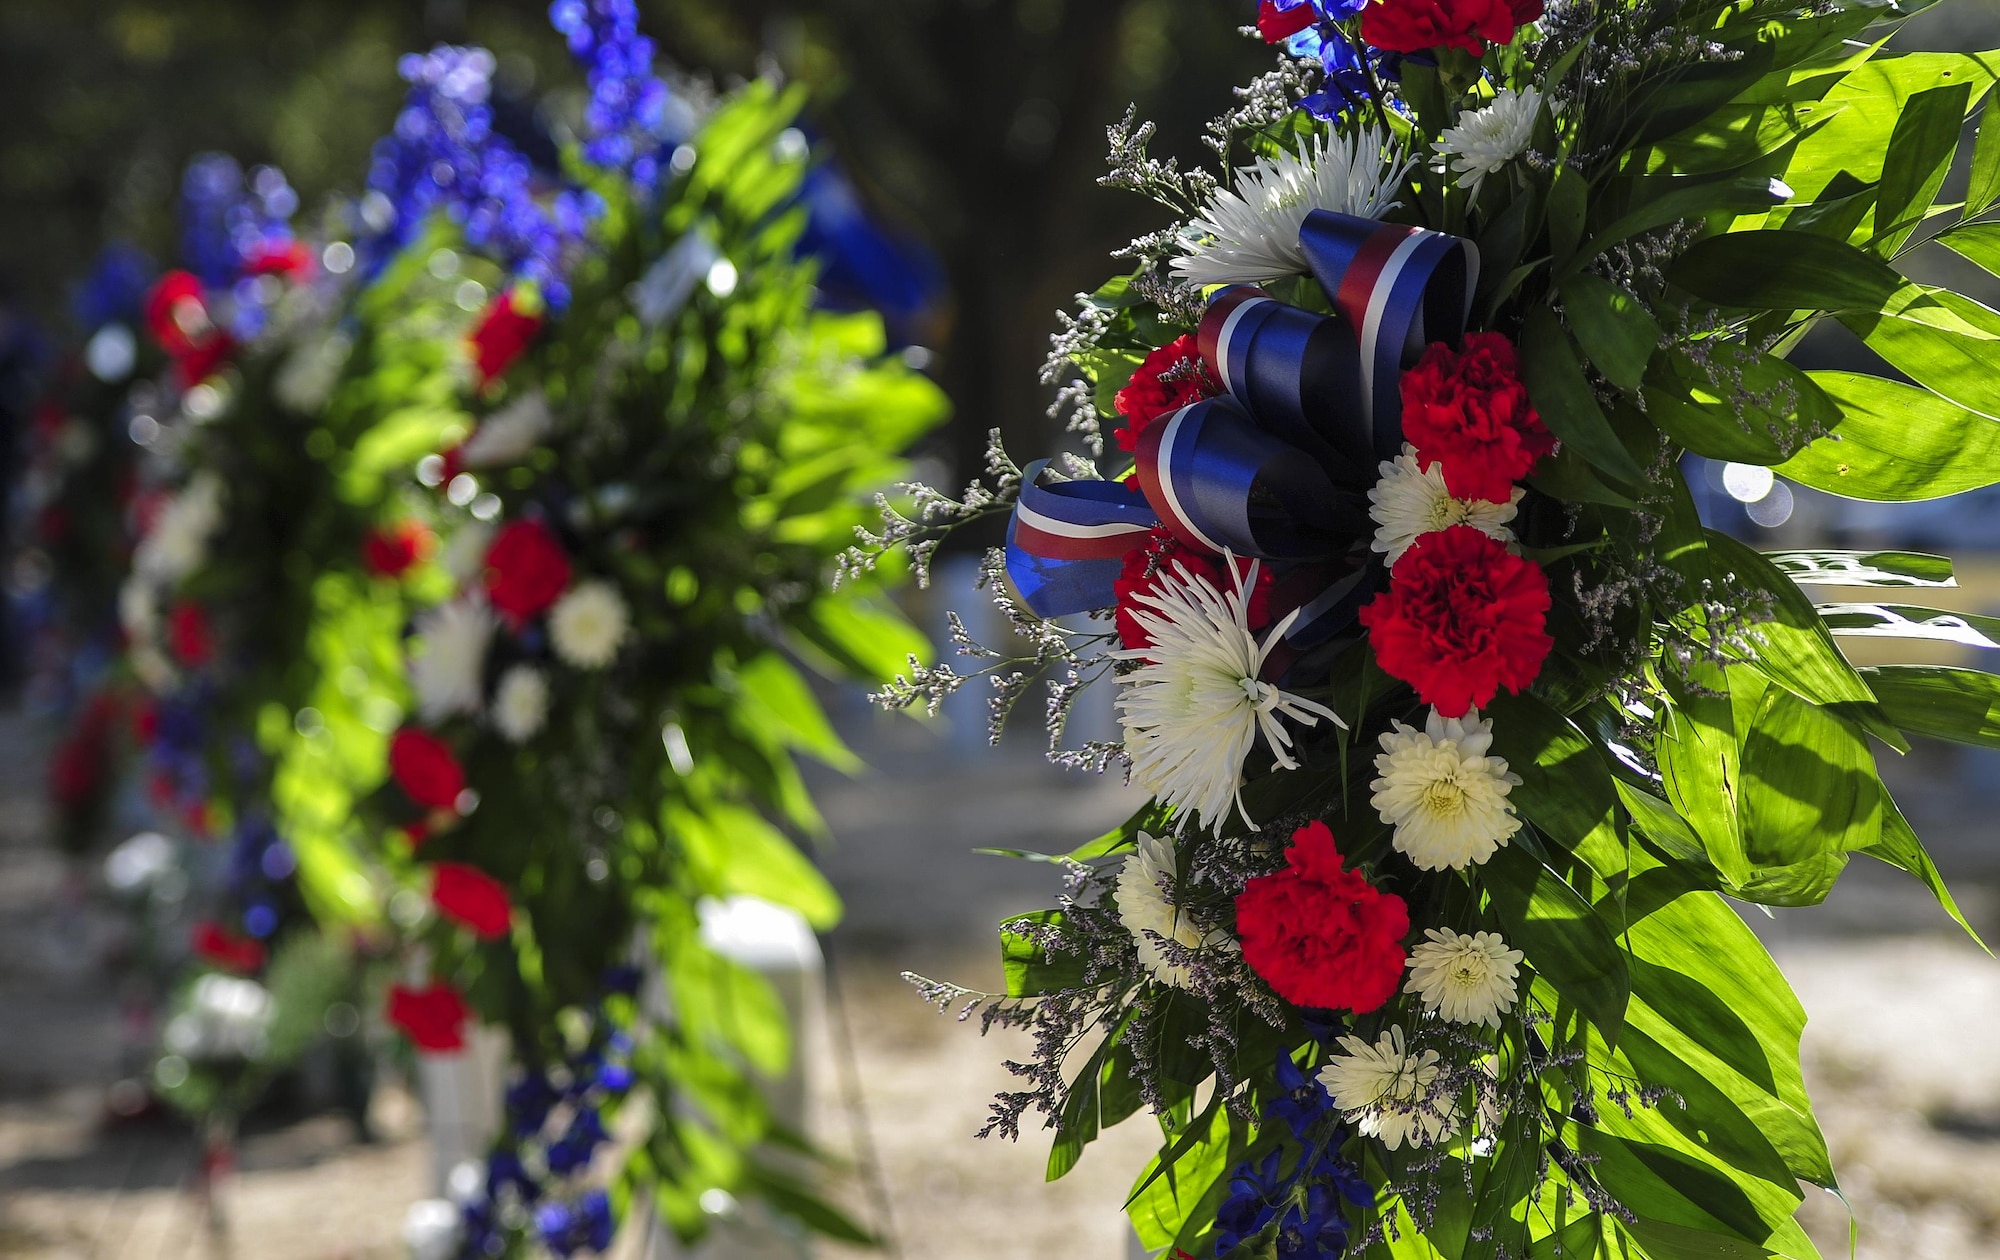 Wreaths are displayed on the graves of Spirit 03 crew members during a remembrance ceremony at Barrancas National Cemetery on Naval Air Station Pensacola, Fla., Jan. 31, 2015. While providing support for joint forces on Jan. 31, 1991, Spirit 03 was shot down, and 14 crew members lost their lives. (U.S. Air Force photo/Airman 1st Class Jeff Parkinson)